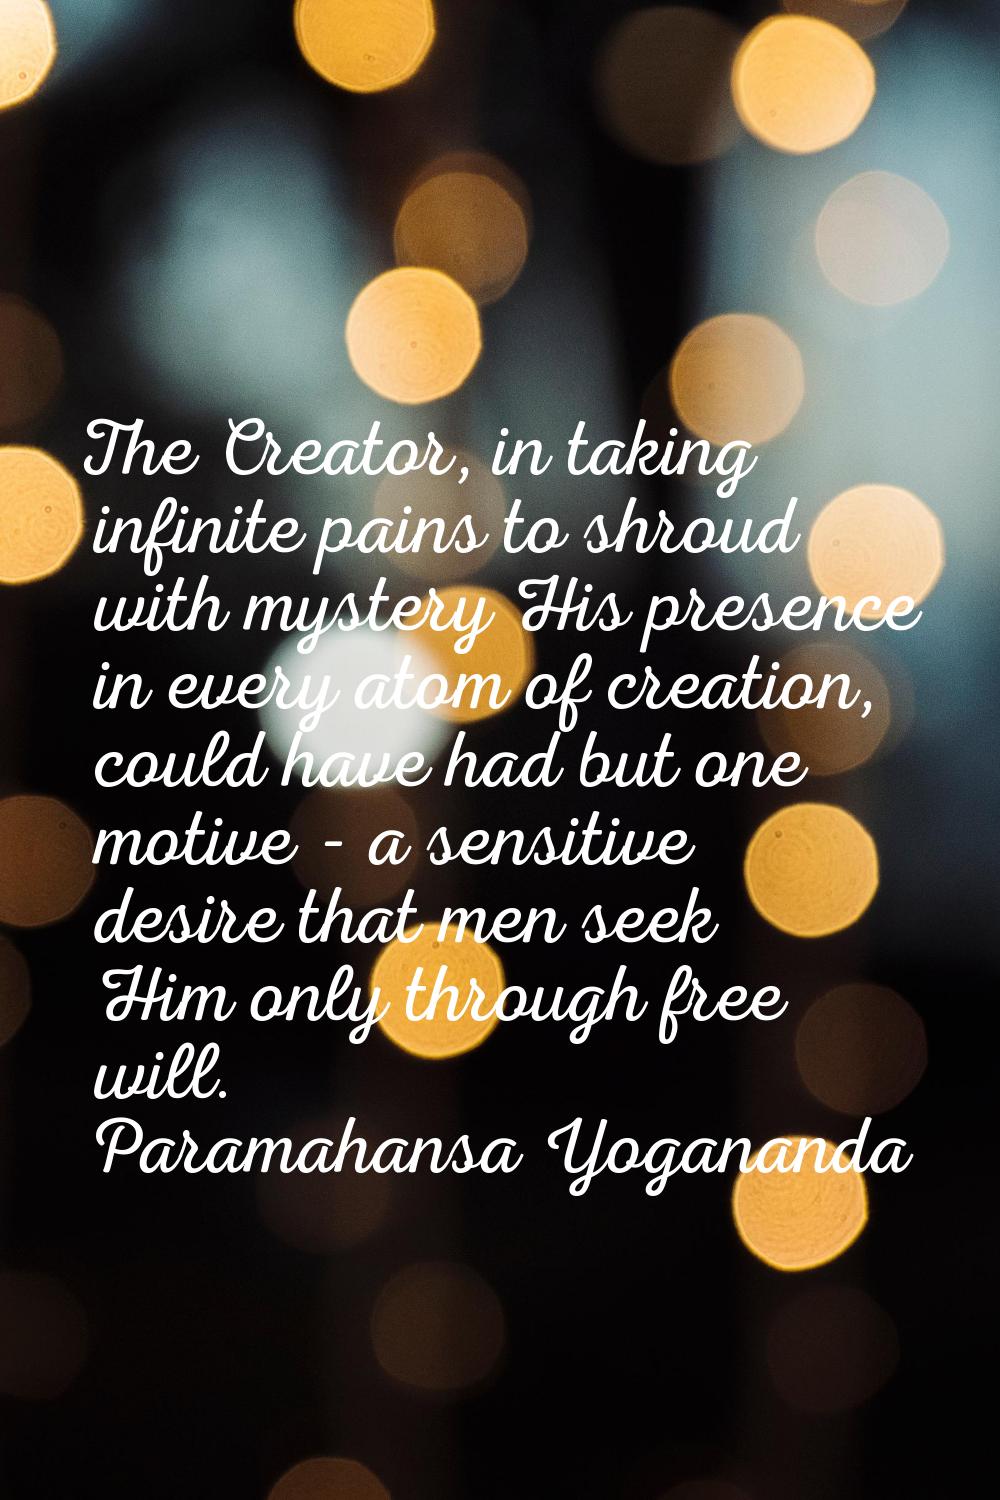 The Creator, in taking infinite pains to shroud with mystery His presence in every atom of creation